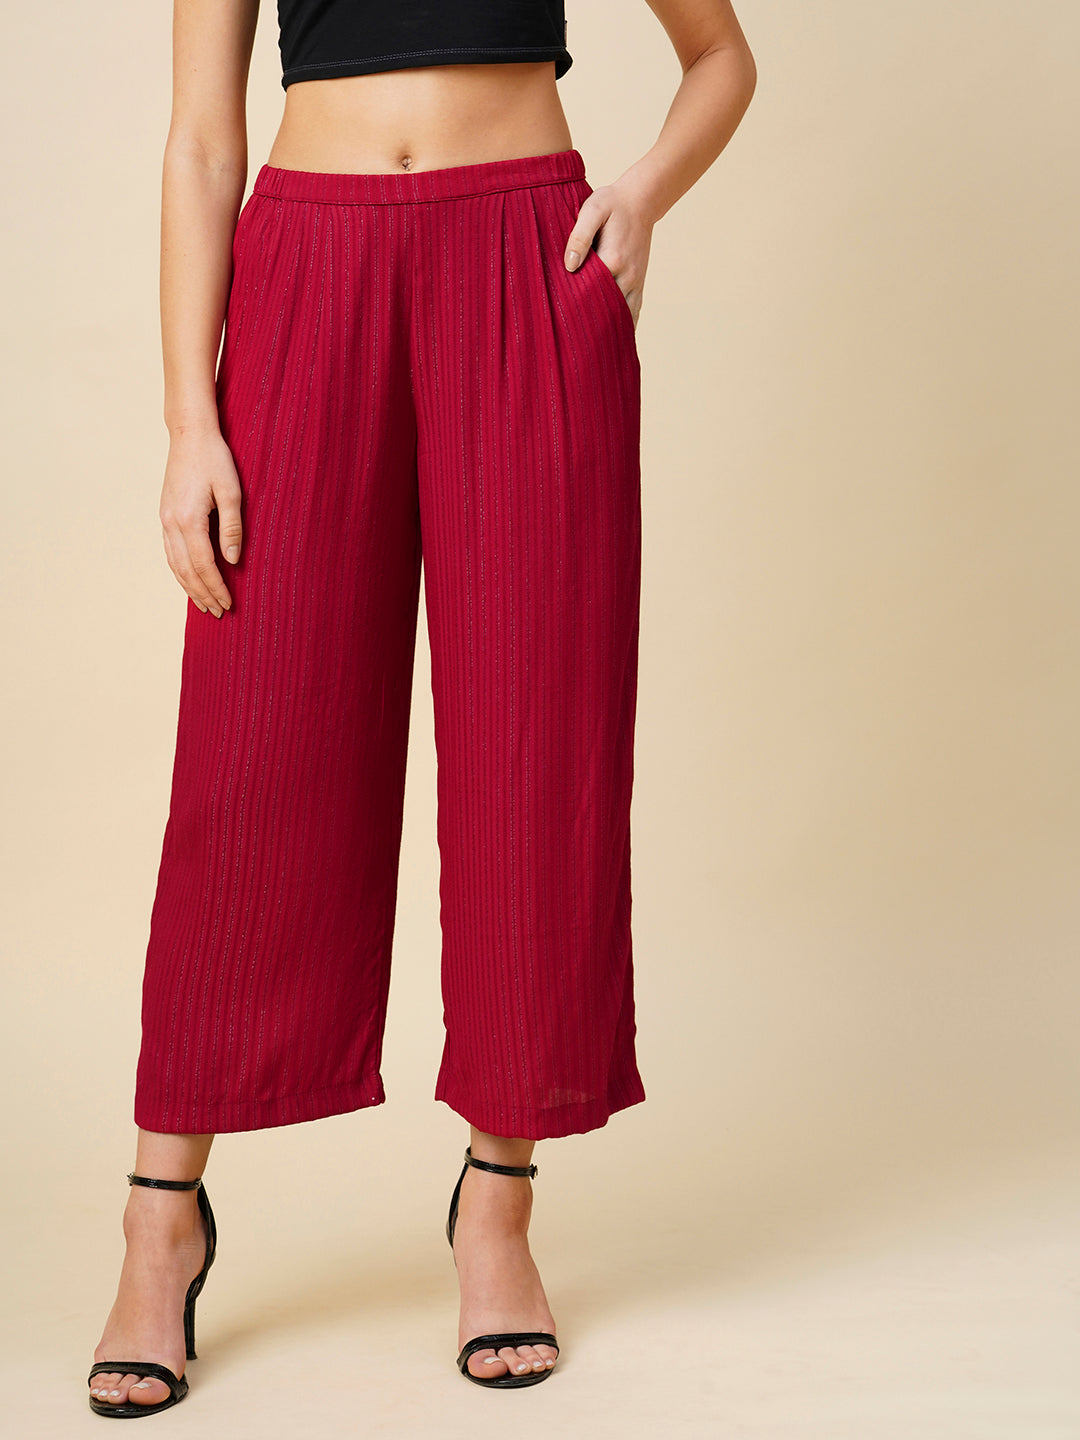 Viscose Crepe Striped Lurex Slip On Cropped Cullotes